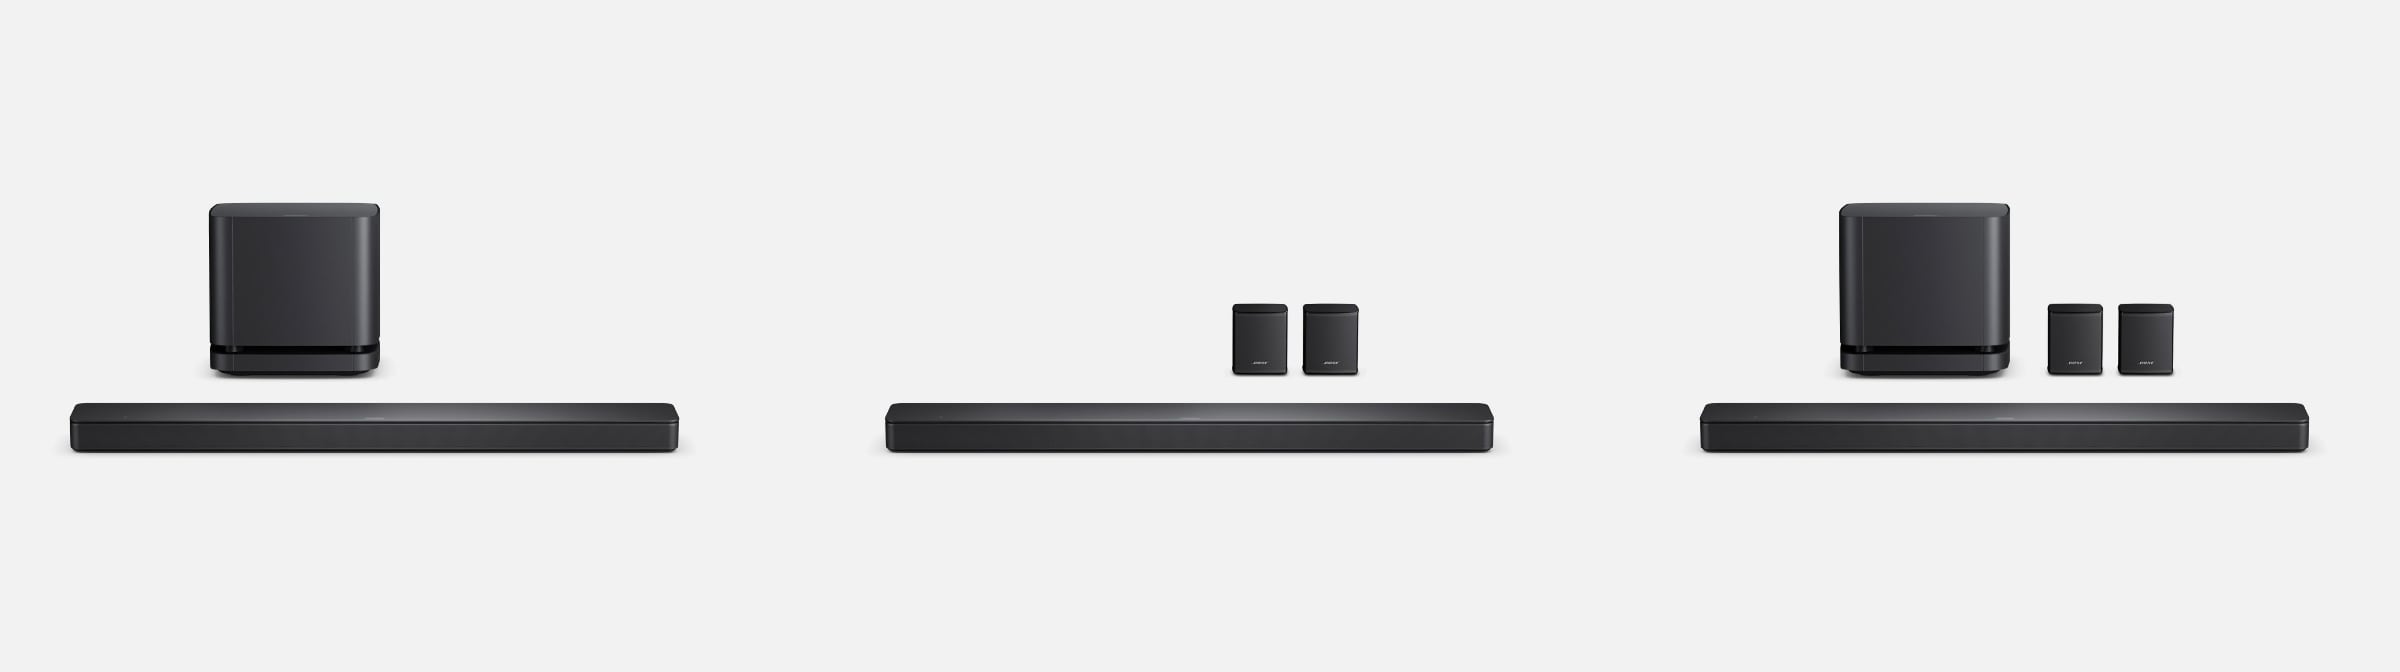 Bose introduces compact soundbar with AirPlay 2 - FlatpanelsHD